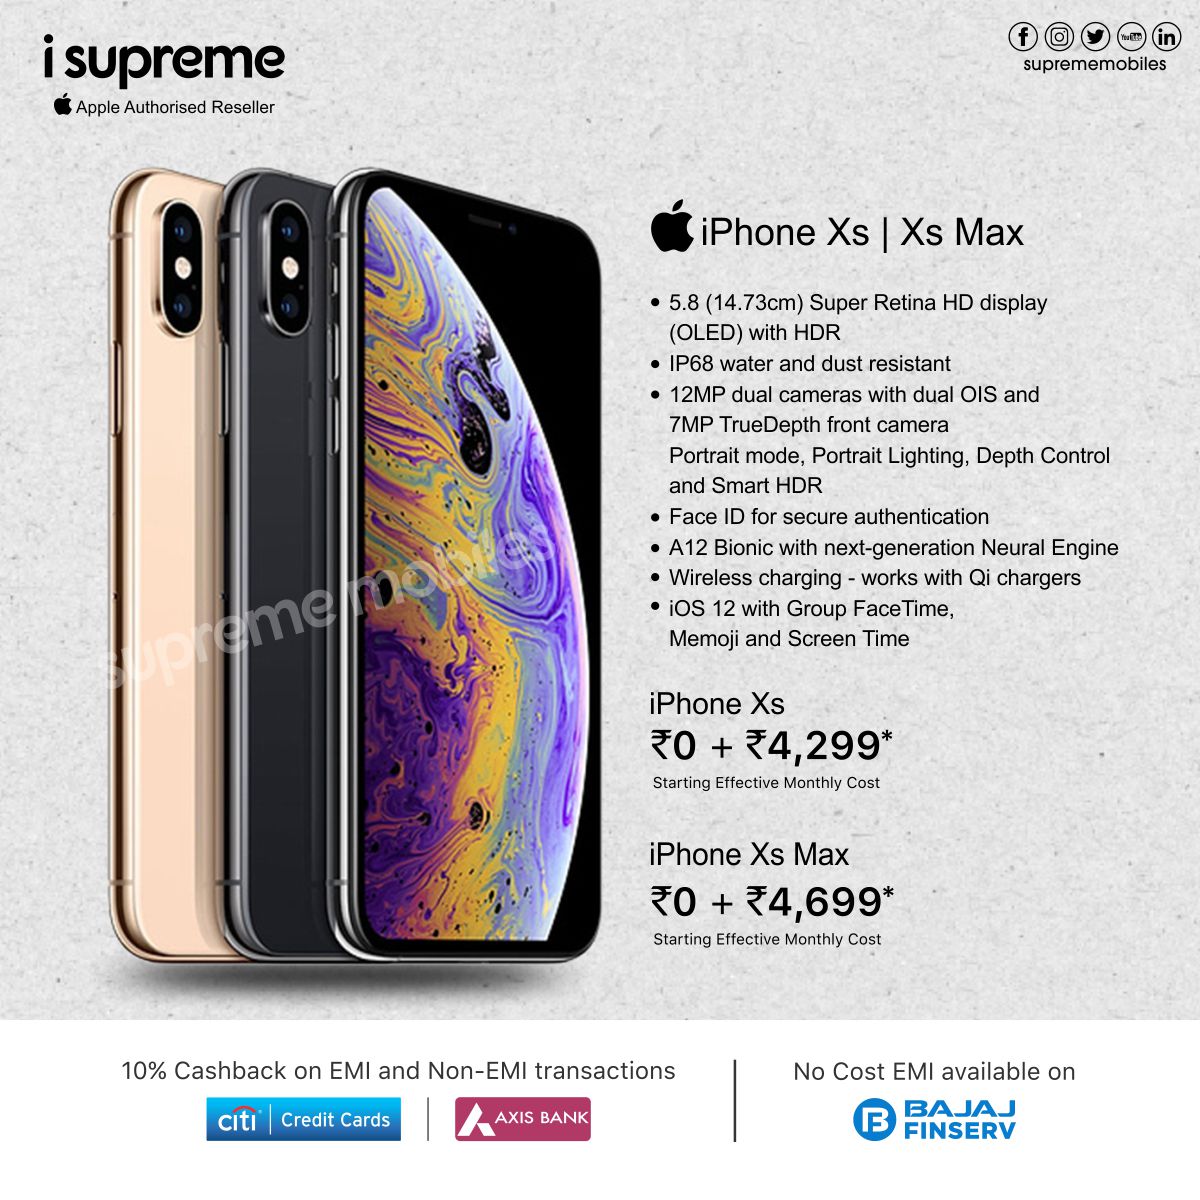 Supreme Mobiles on X: Apple IPhone Xs & Xs Max with Easy EMI Offer  Starting Effective Monthly cost 4,299*/- No Cost EMI Available On Bajaj  finserv  Walk-in to our stores for